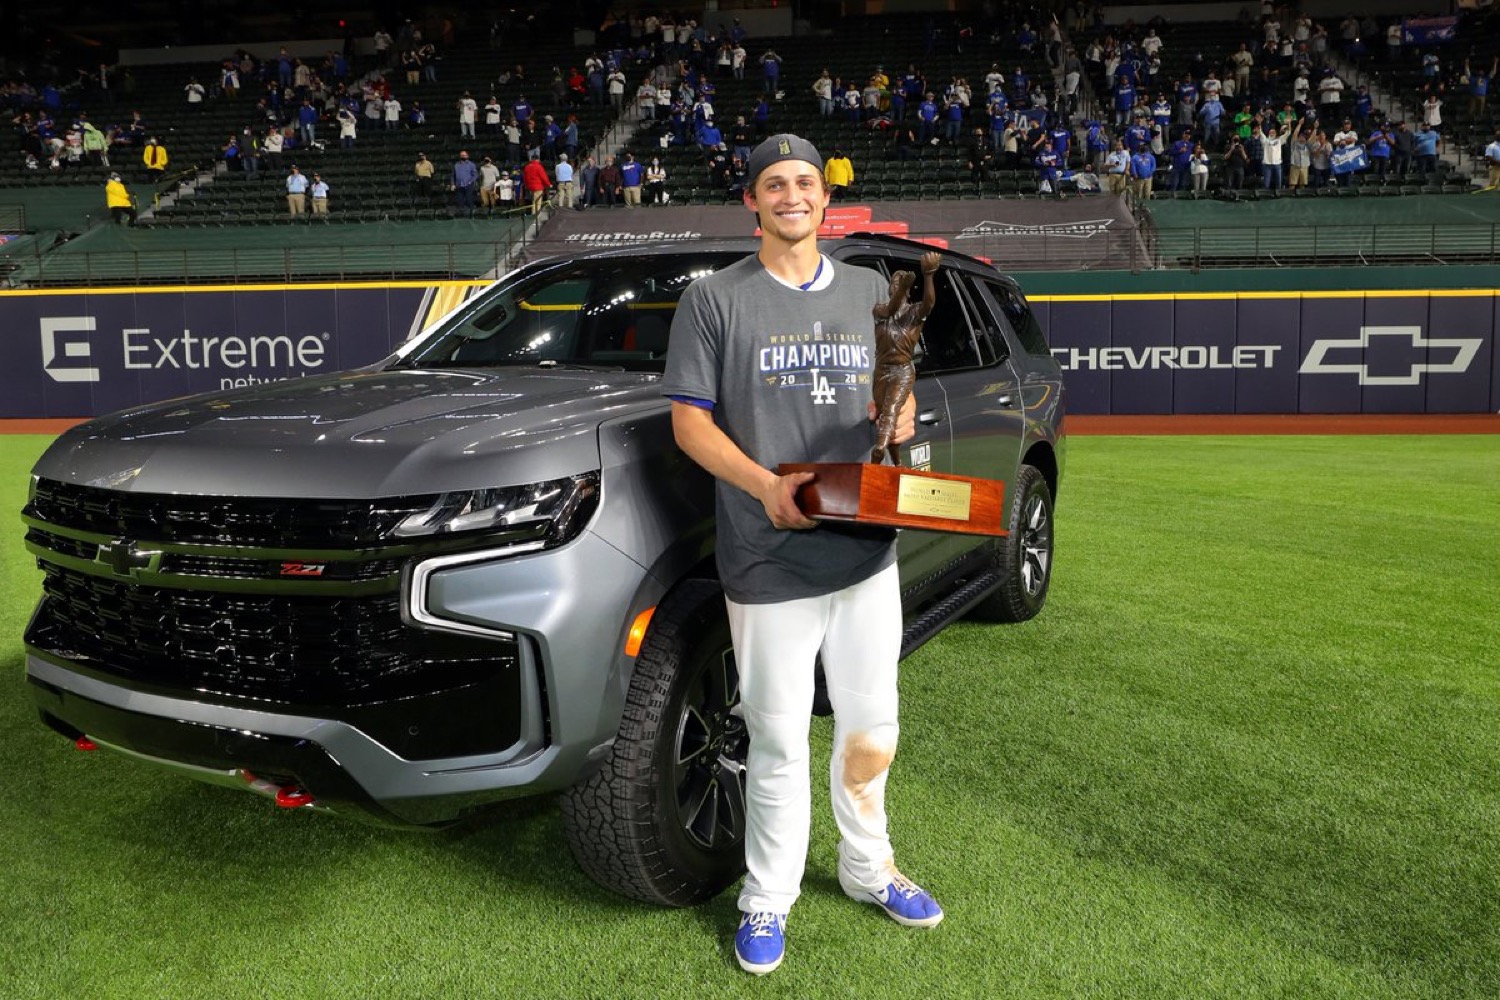 World Series 2020: Dodgers shortstop Corey Seager claims MVP honors